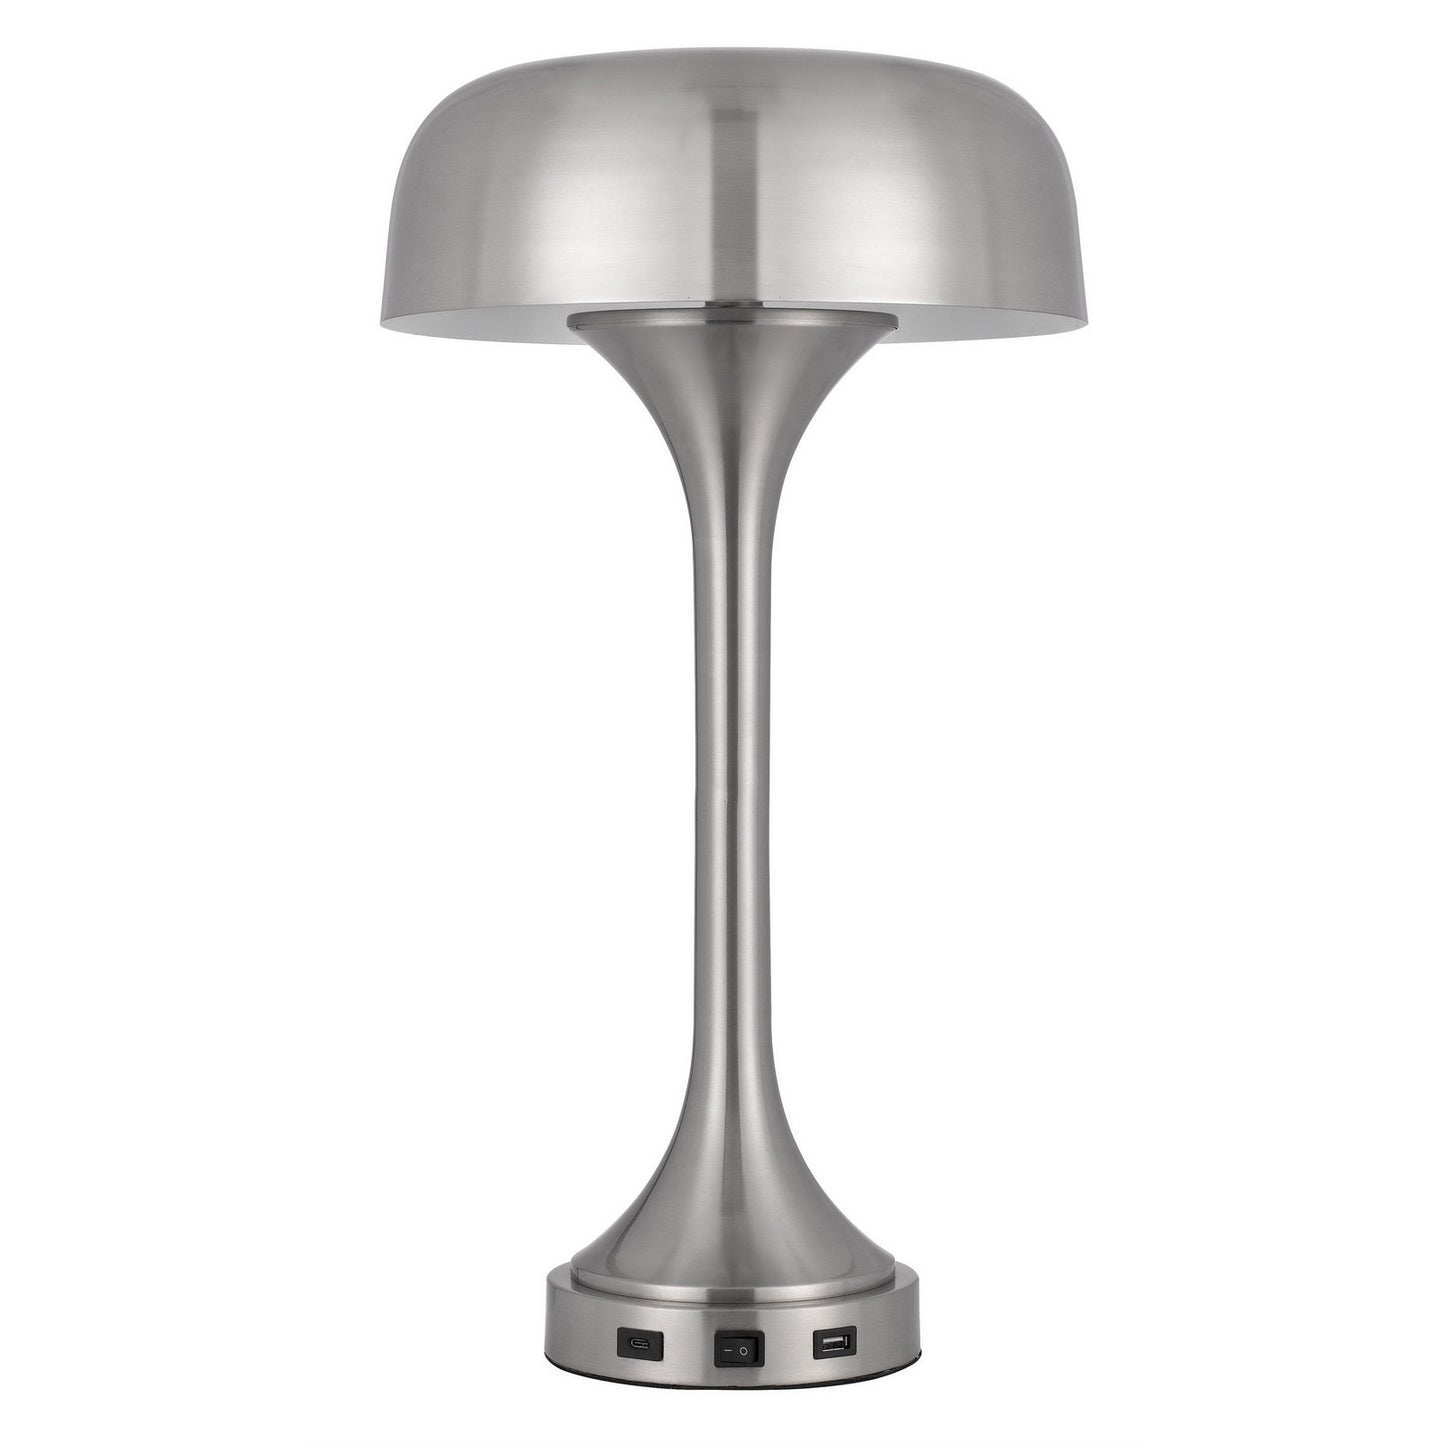 22" Nickel Metal Two Light Usb Table Lamp With Nickel Dome Shade